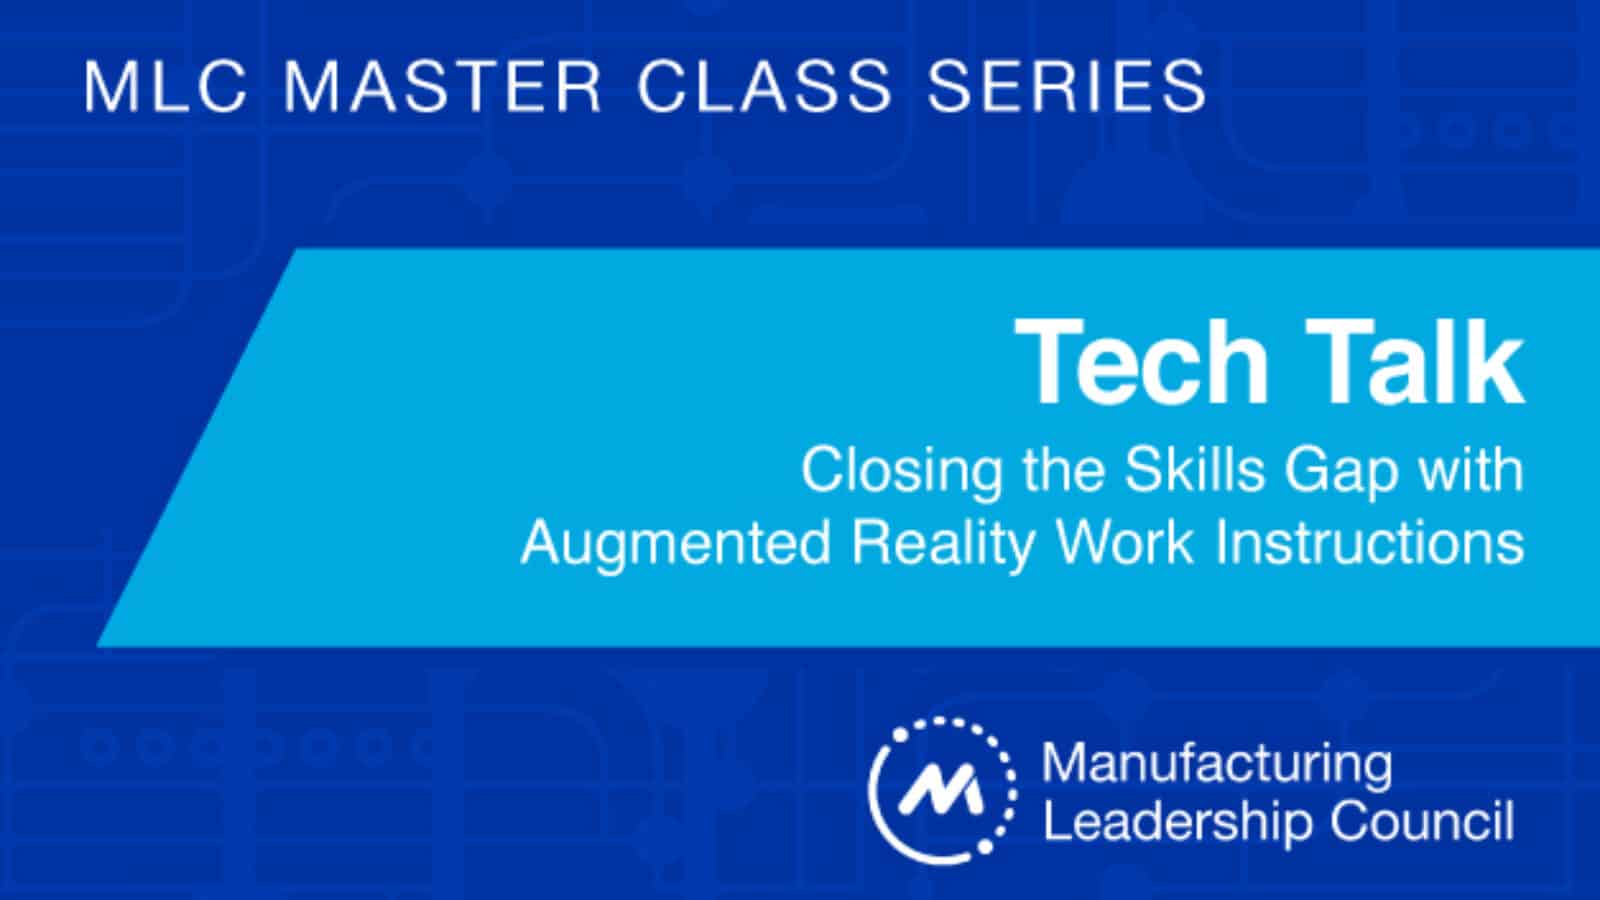 MLC Master Class Series | Tech Talk: Closing the Skills Gap with Augmented Reality Work Instructions